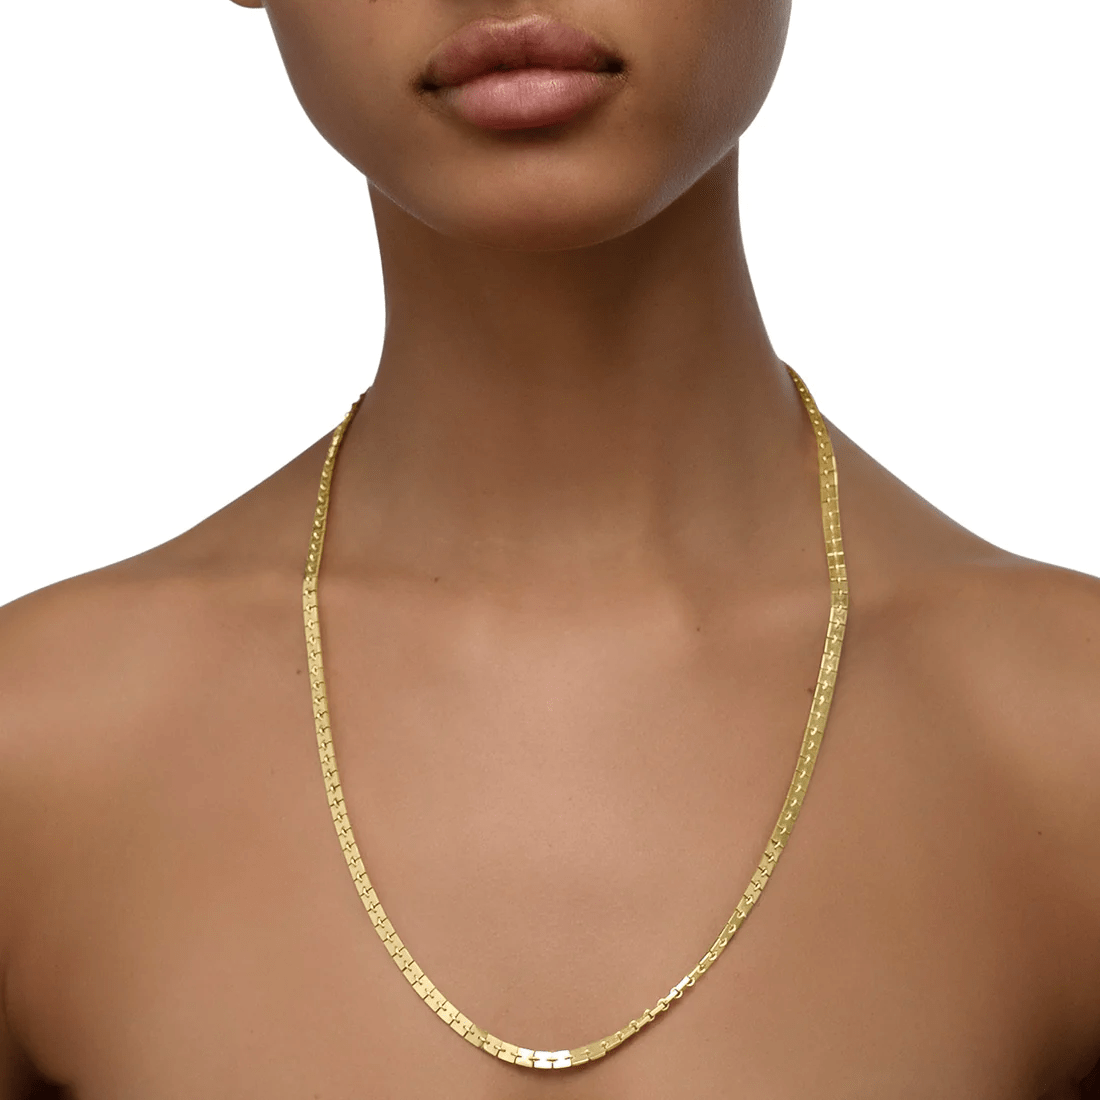 Cadar 18K Yellow Gold Square Necklace